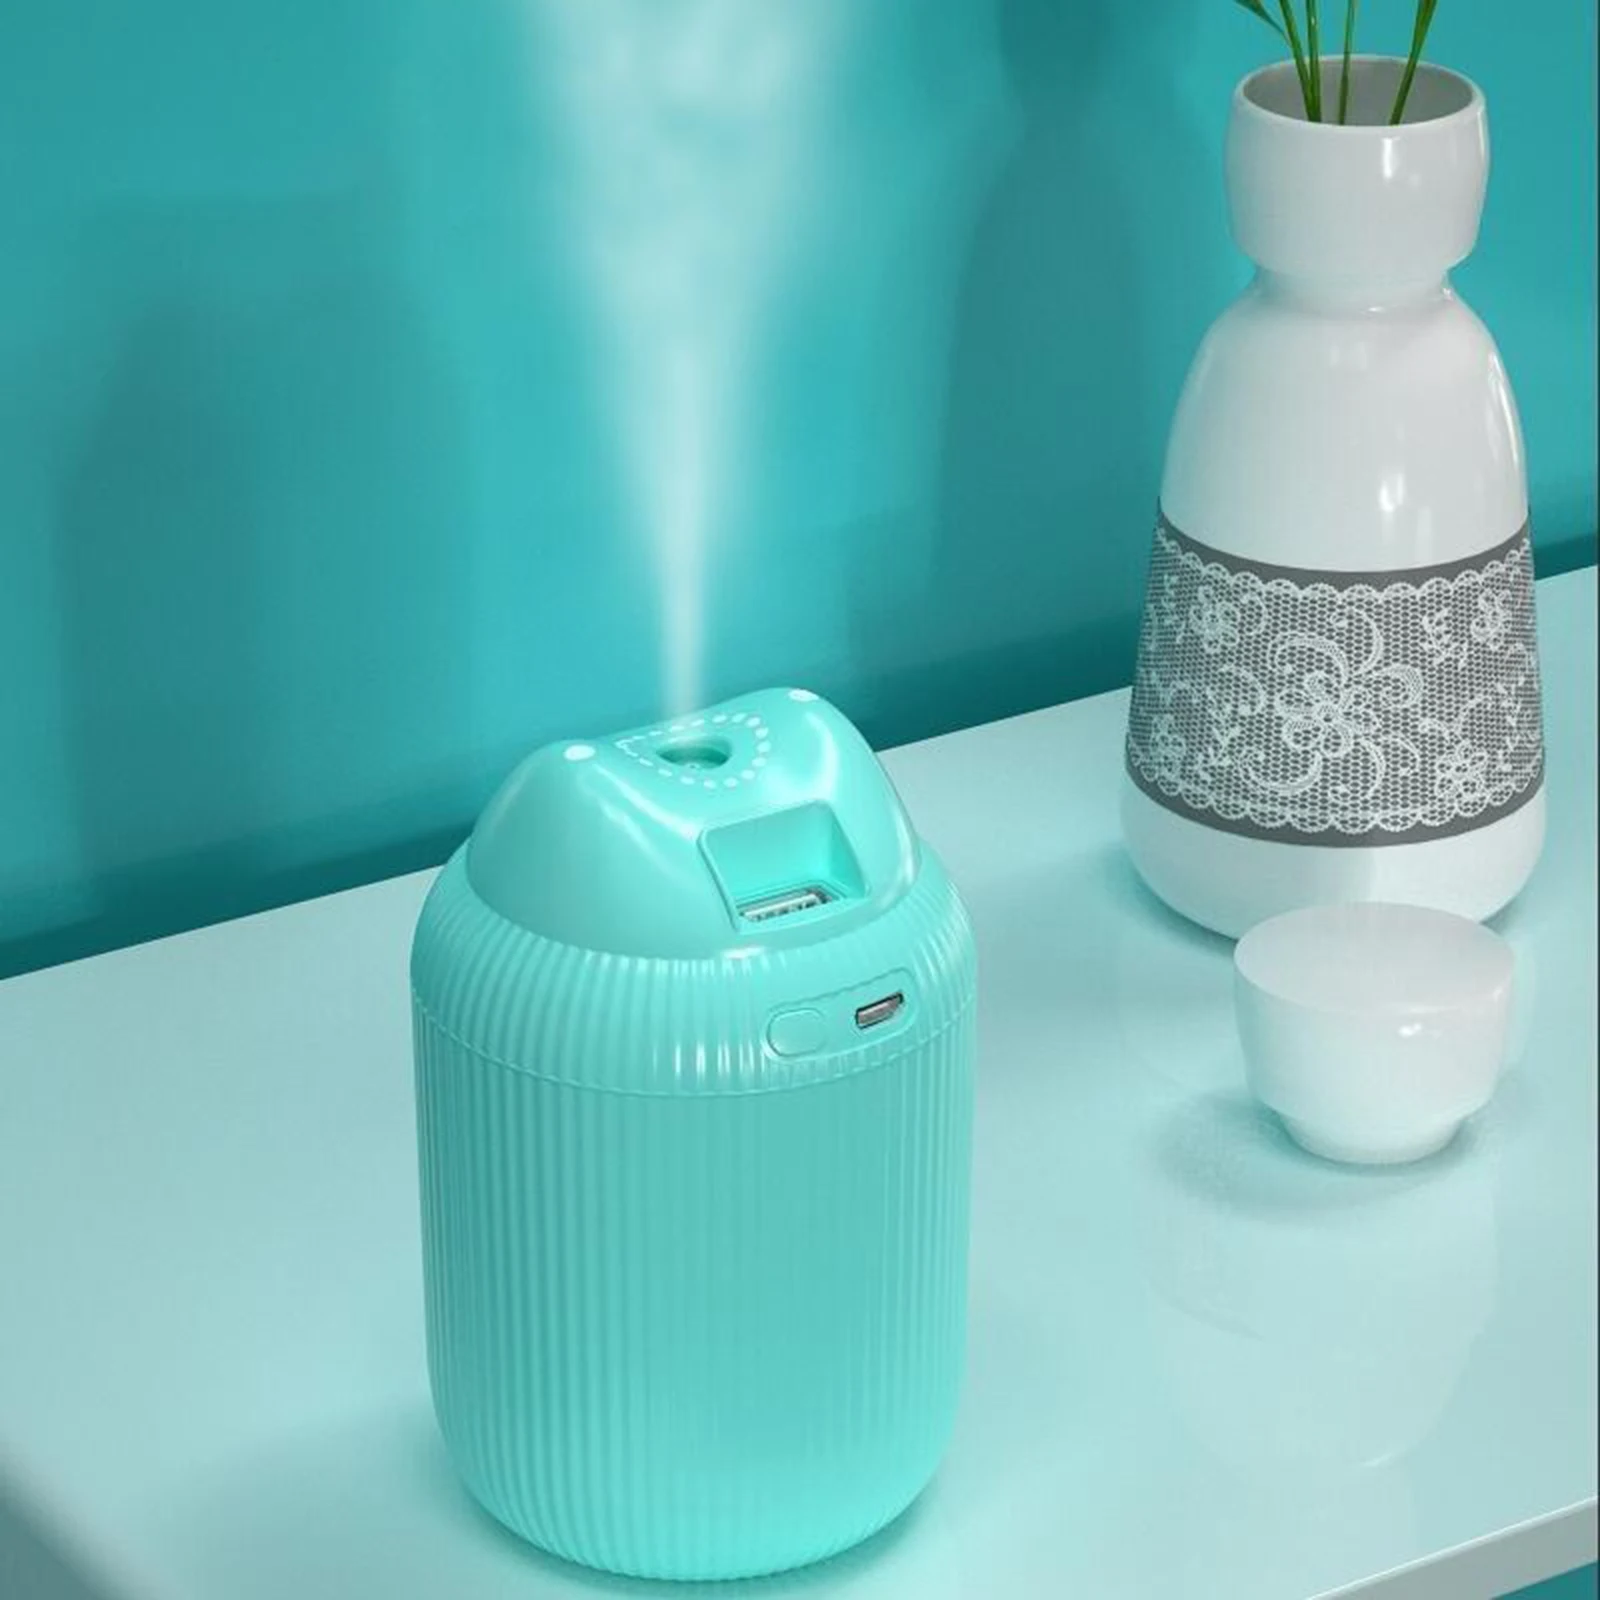 Ultrasonic Cool Mist Humidifier, Whisper Quite, for Home Bedroom Baby Nursery and Office 220ml